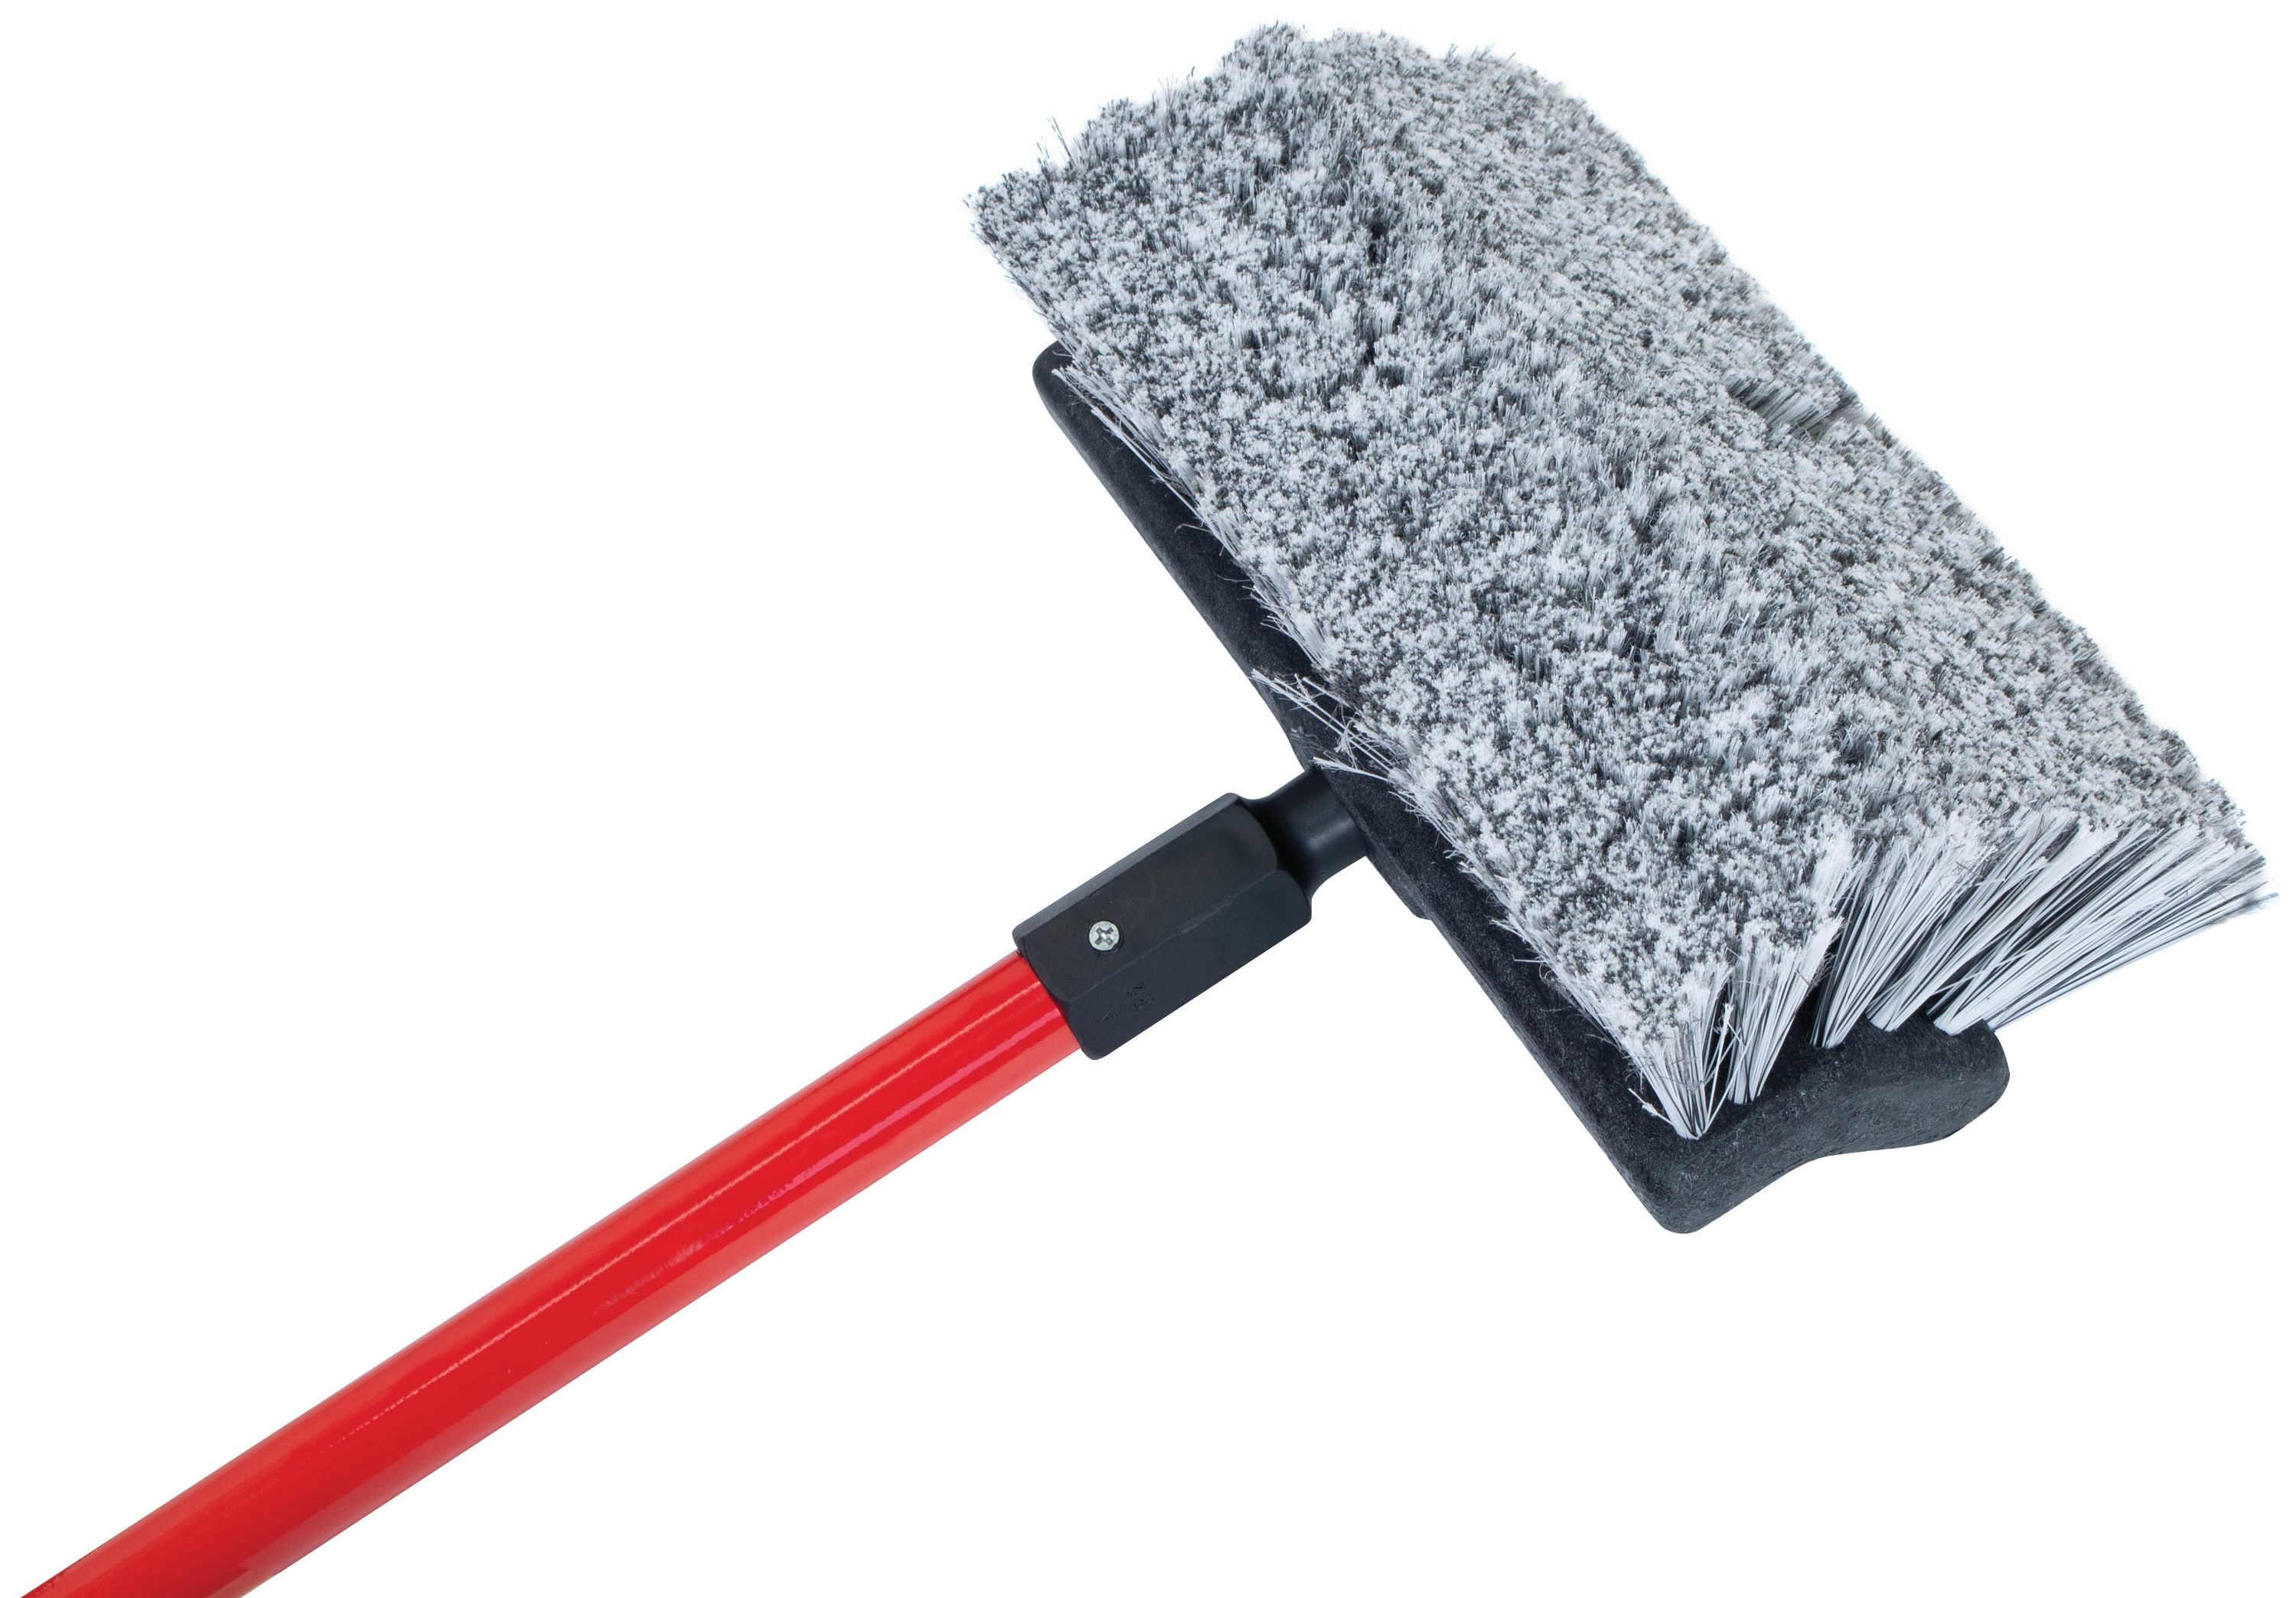 Thickened Soft Bristle Brush For Cleaning Walls And Furniture